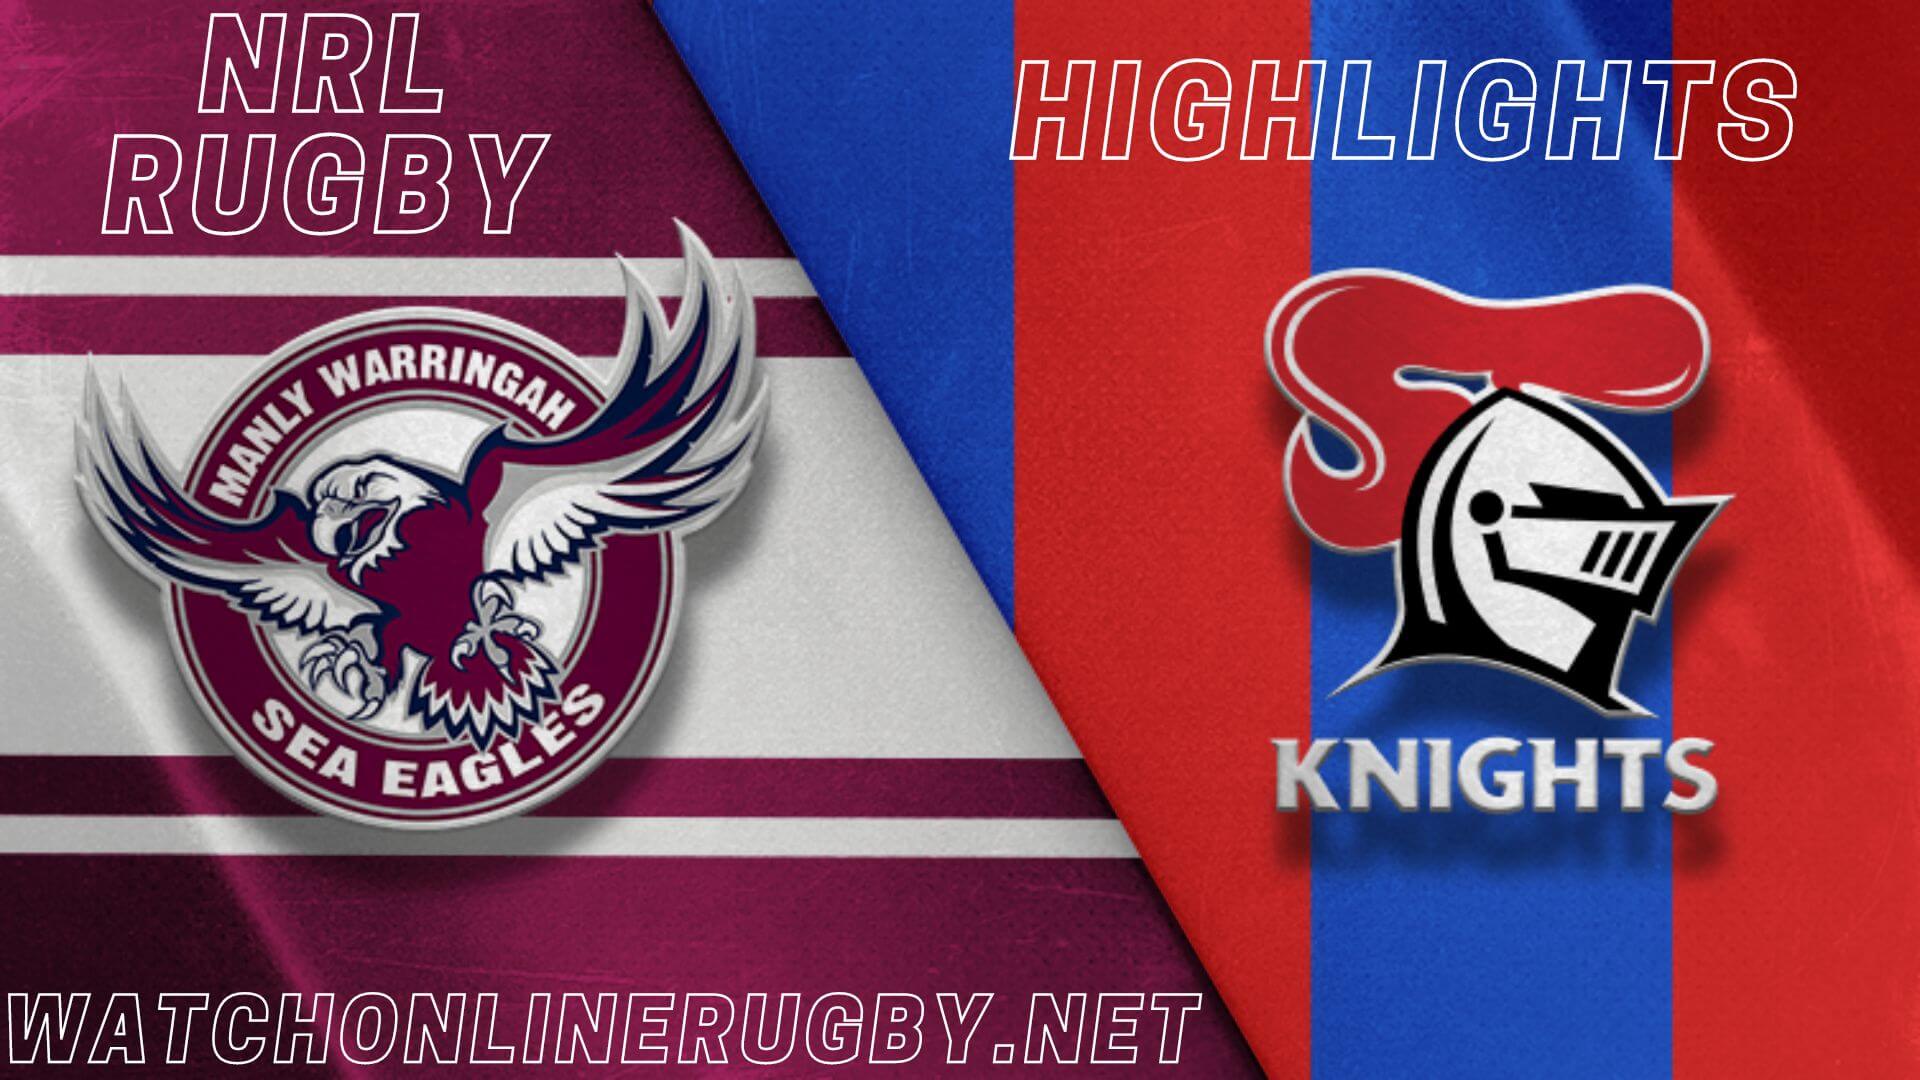 Sea Eagles Vs Knights Highlights RD 18 NRL Rugby